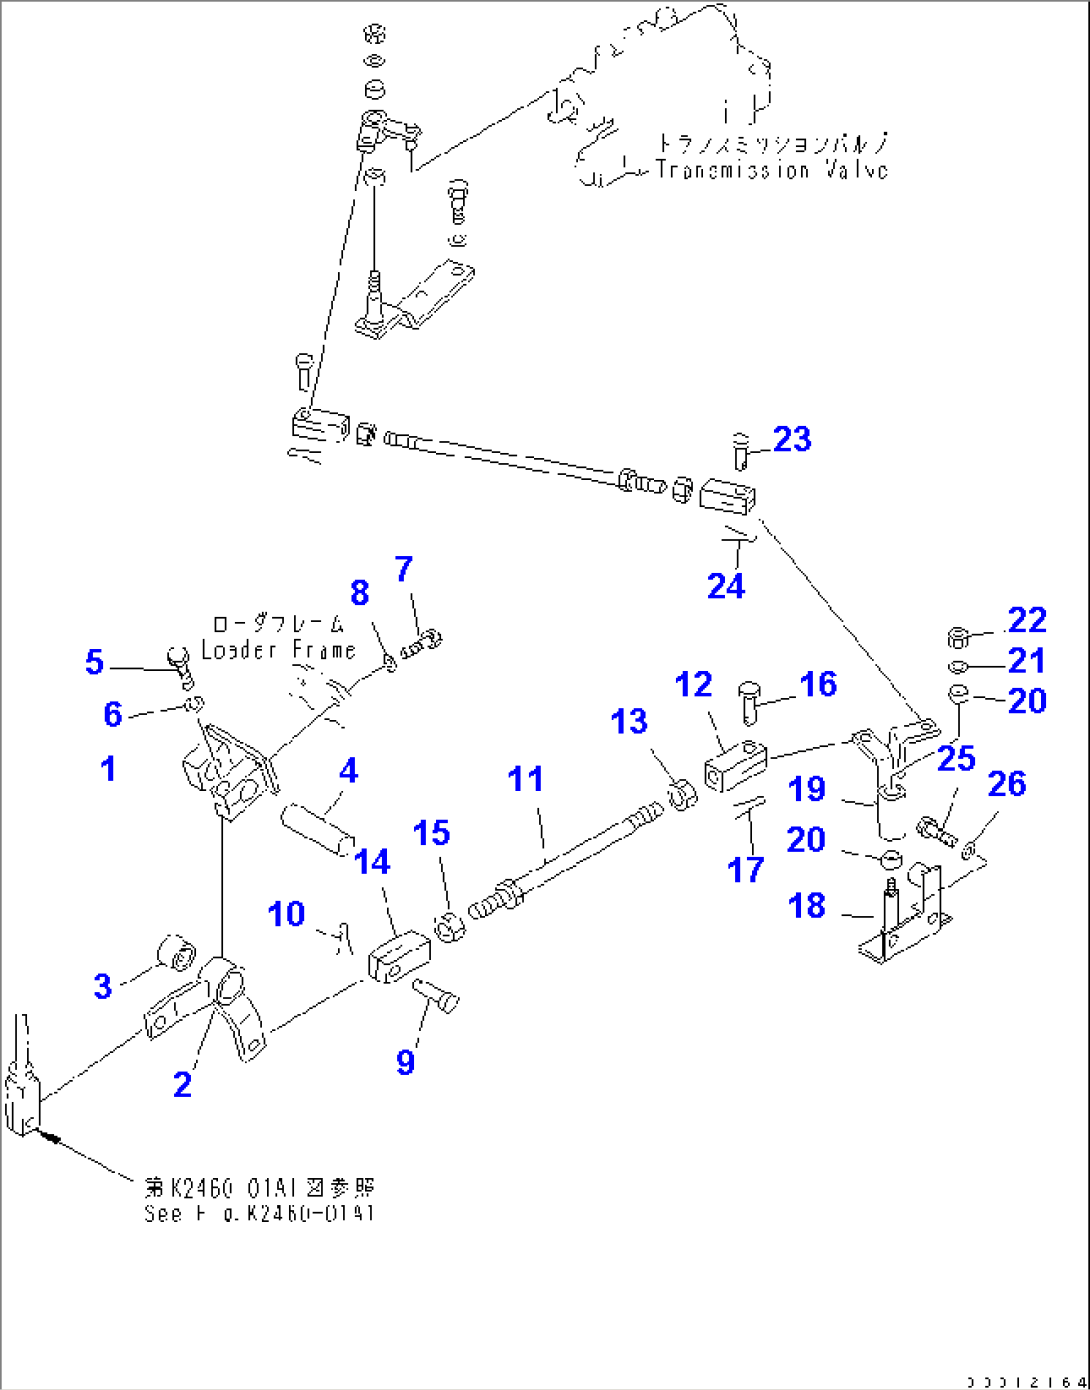 INCHING CONTROL (LINKAGE) (FOR F3-R3 TRANSMISSION)